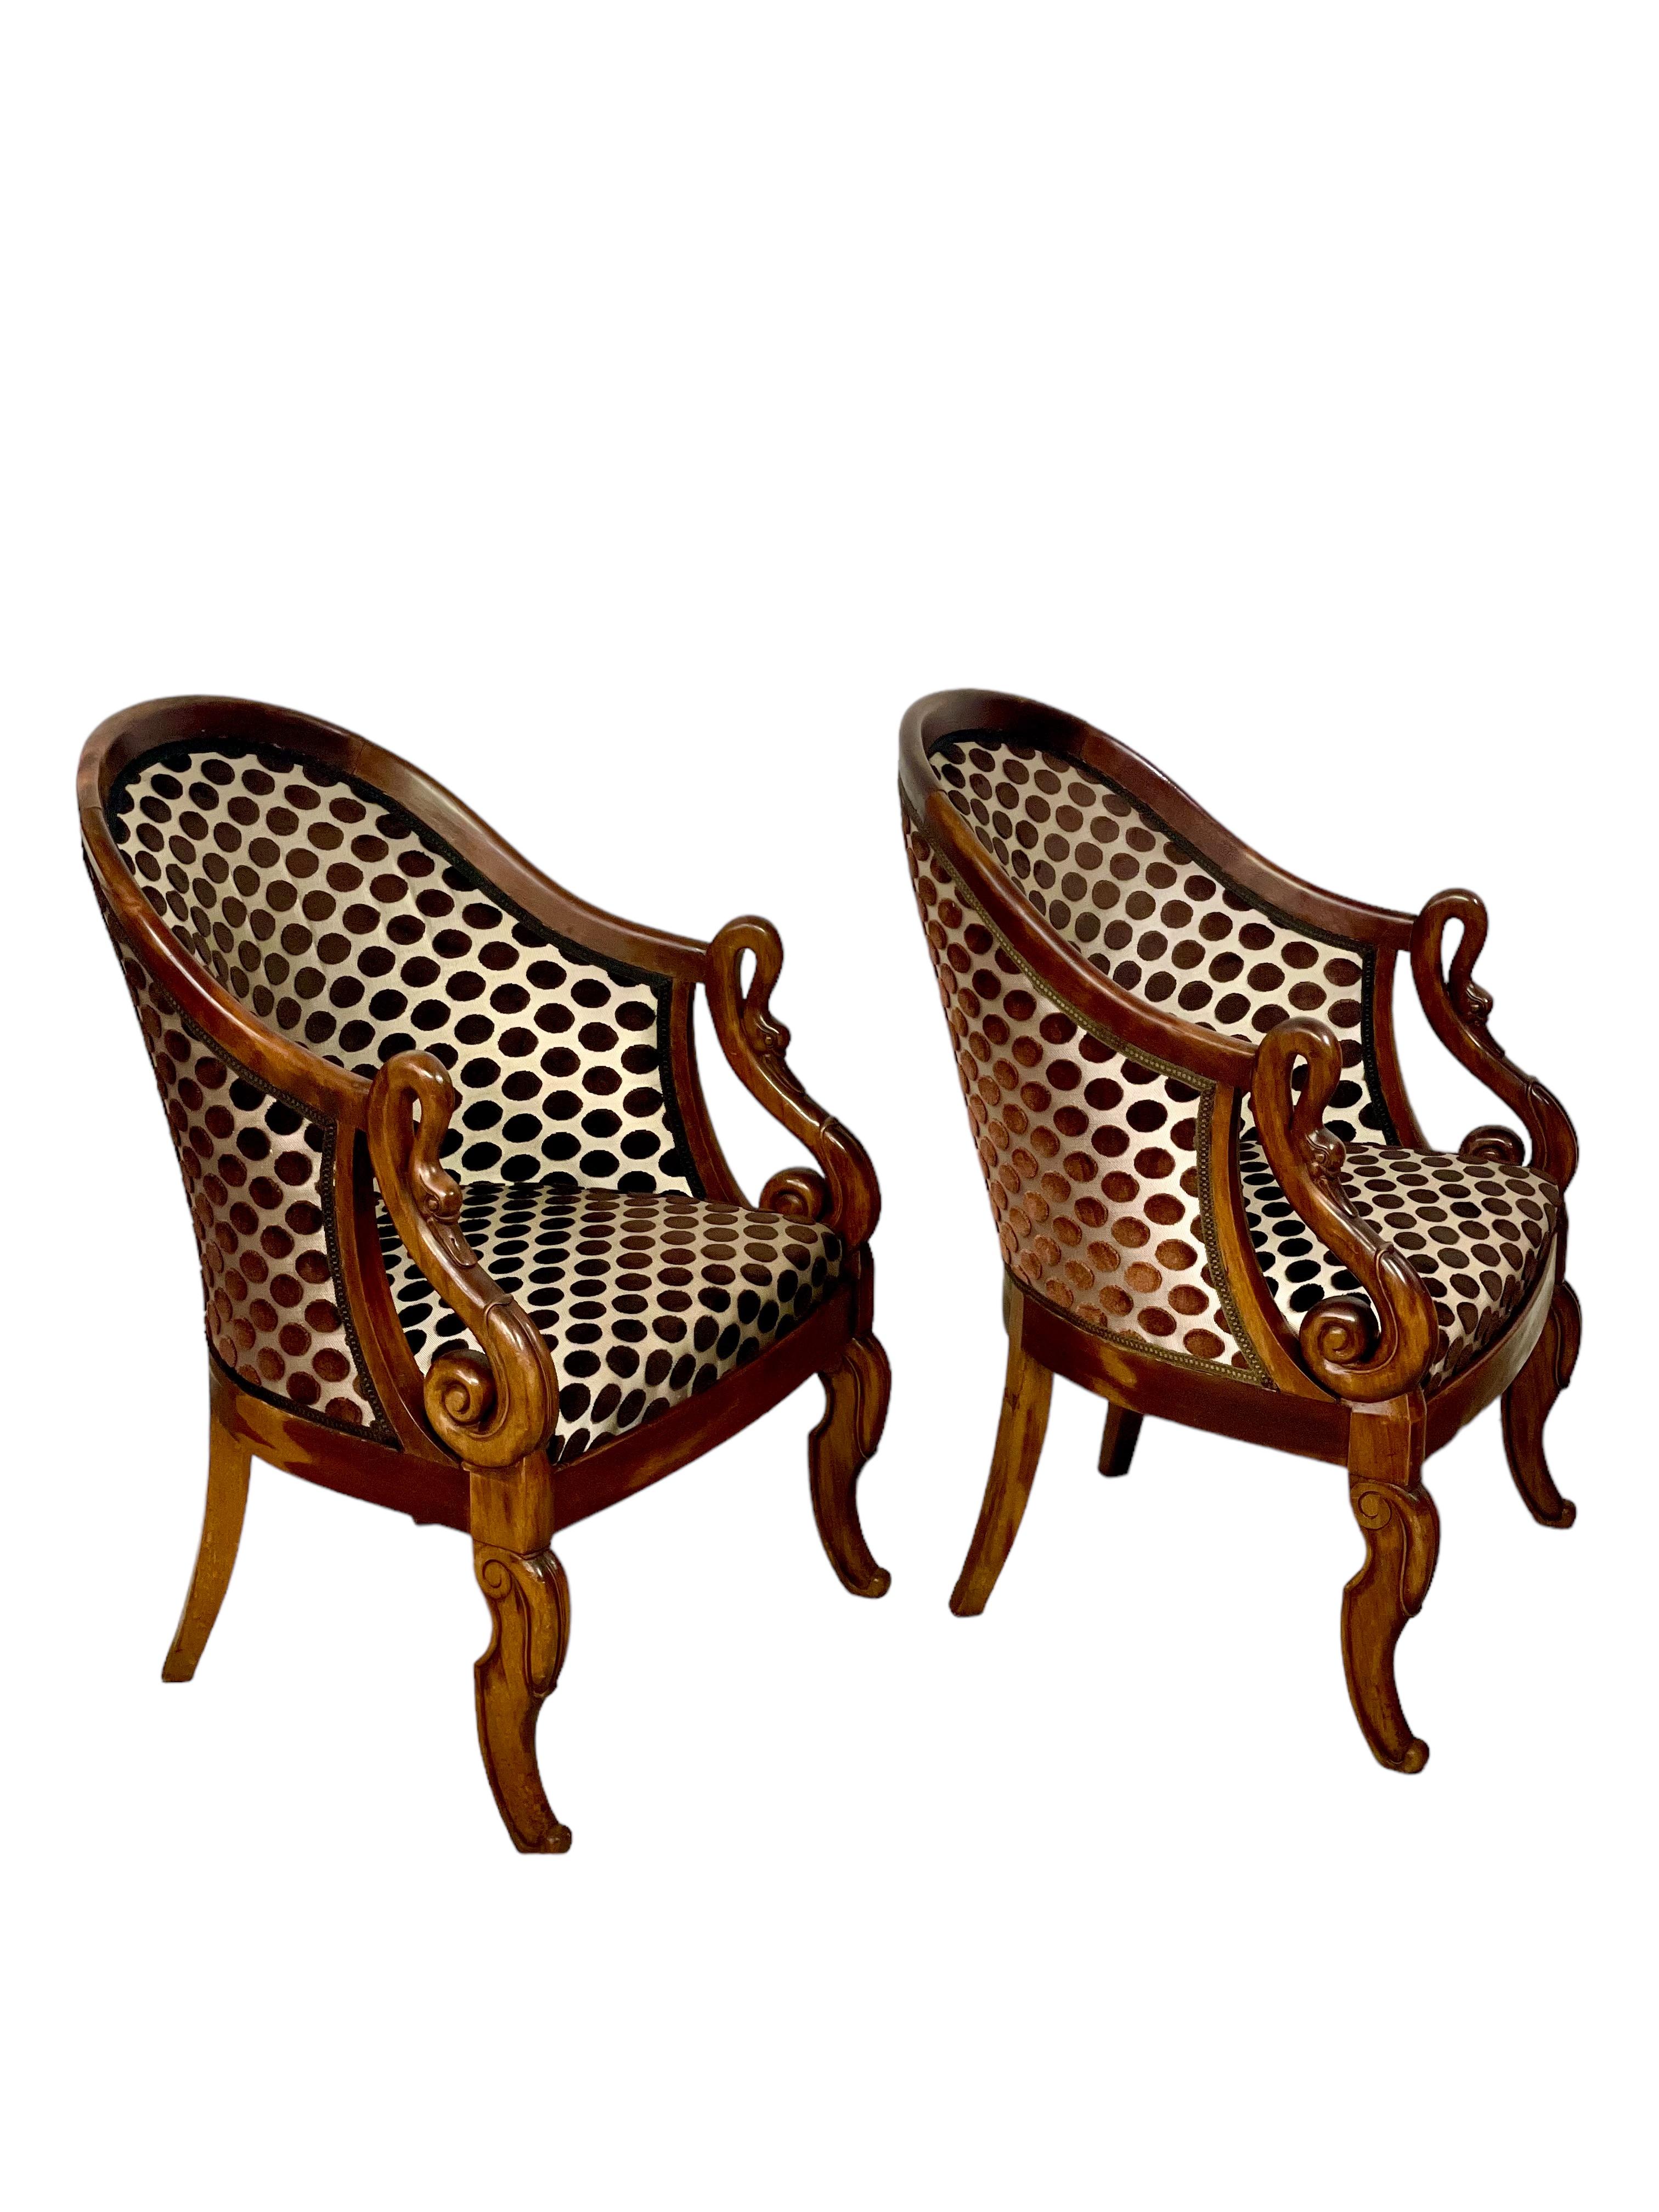 Enhance your interior with this stunning pair of Empire-style Bergères chairs dating back to the early 20th century. These elegant armchairs feature gracefully curved gondola-shaped backrests and swan neck armrests, providing luxurious comfort for